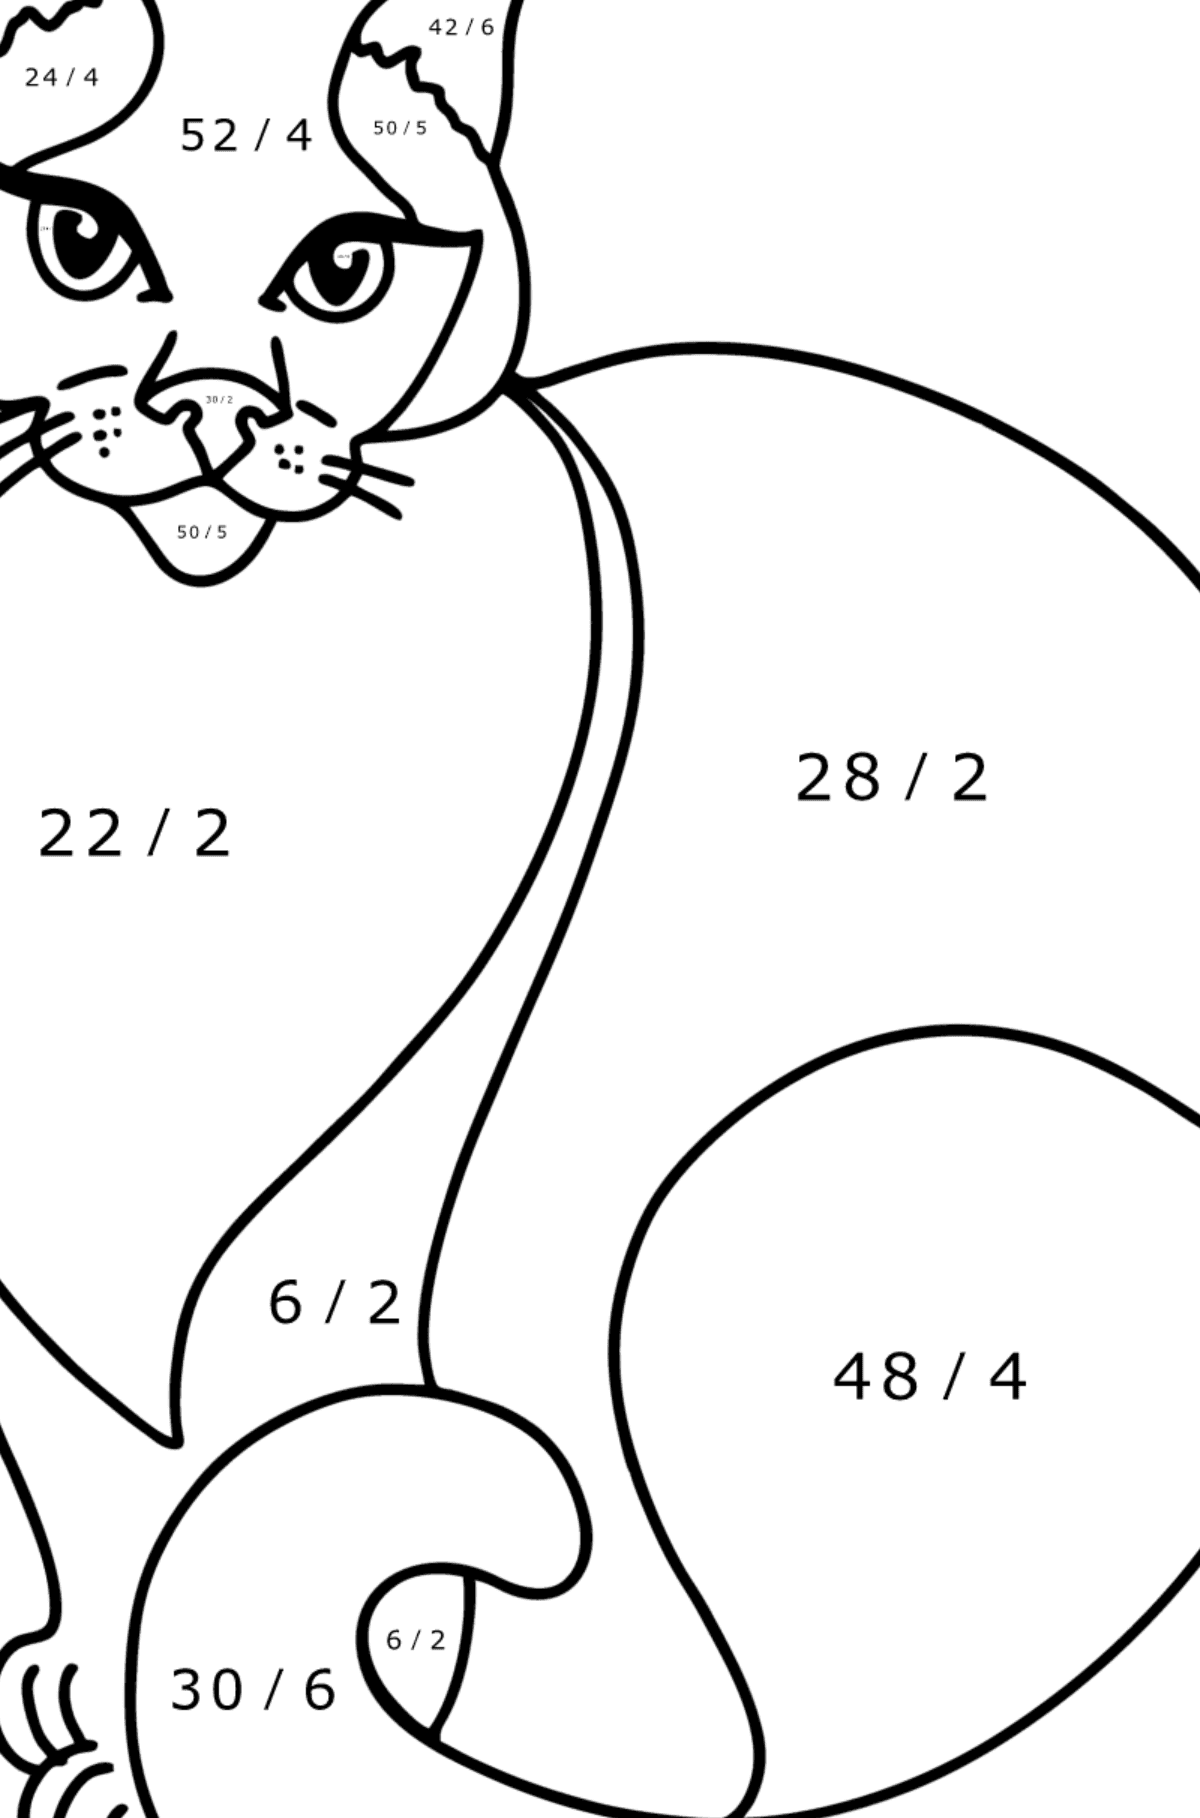 Siamese Cat coloring page - Math Coloring - Division for Kids